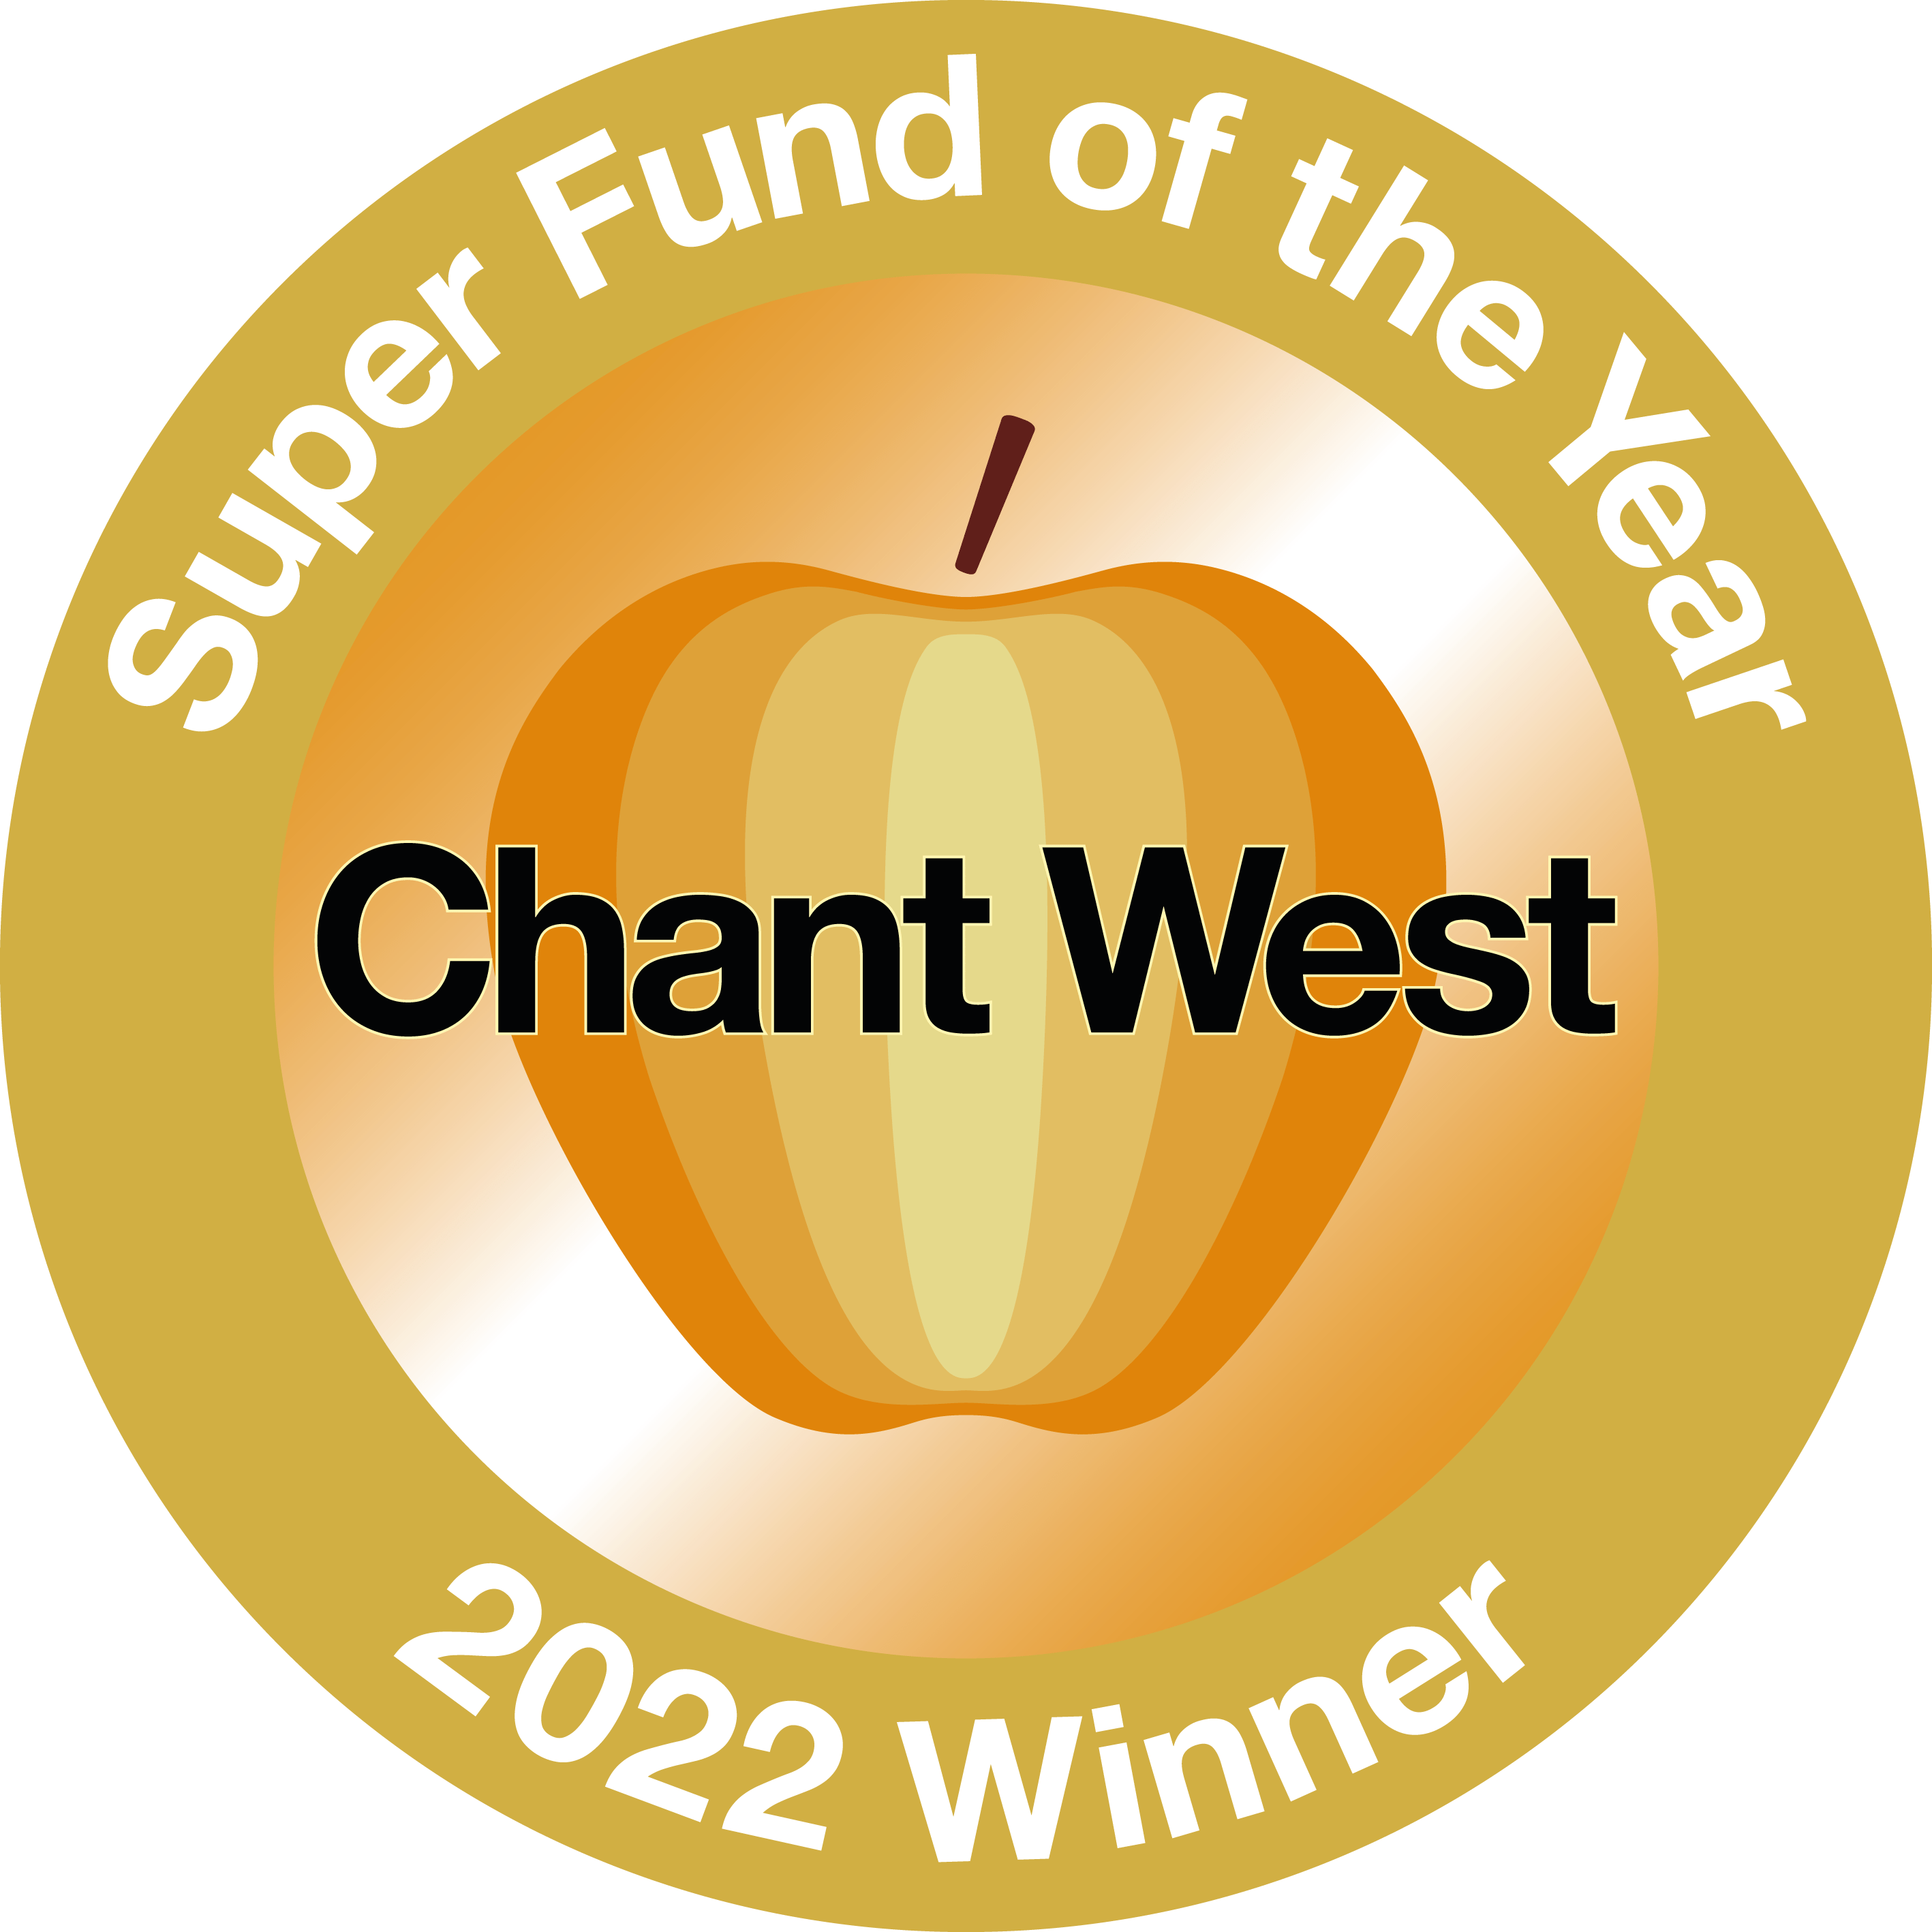 Logo of Chant West Super Fund of the Year 2022 Winner